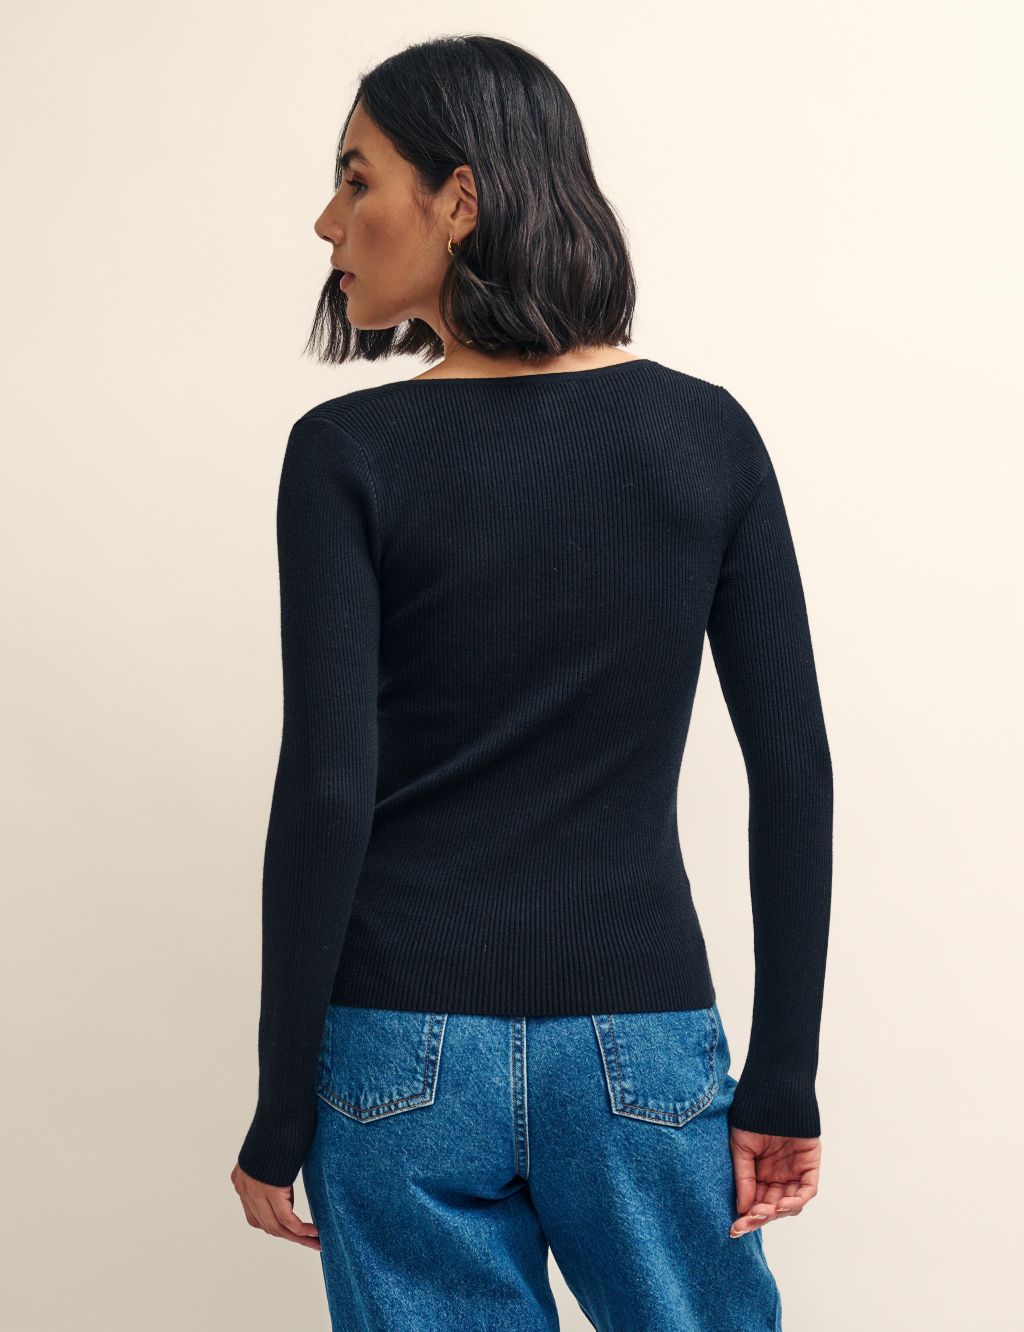 Ribbed Knitted Top image 4